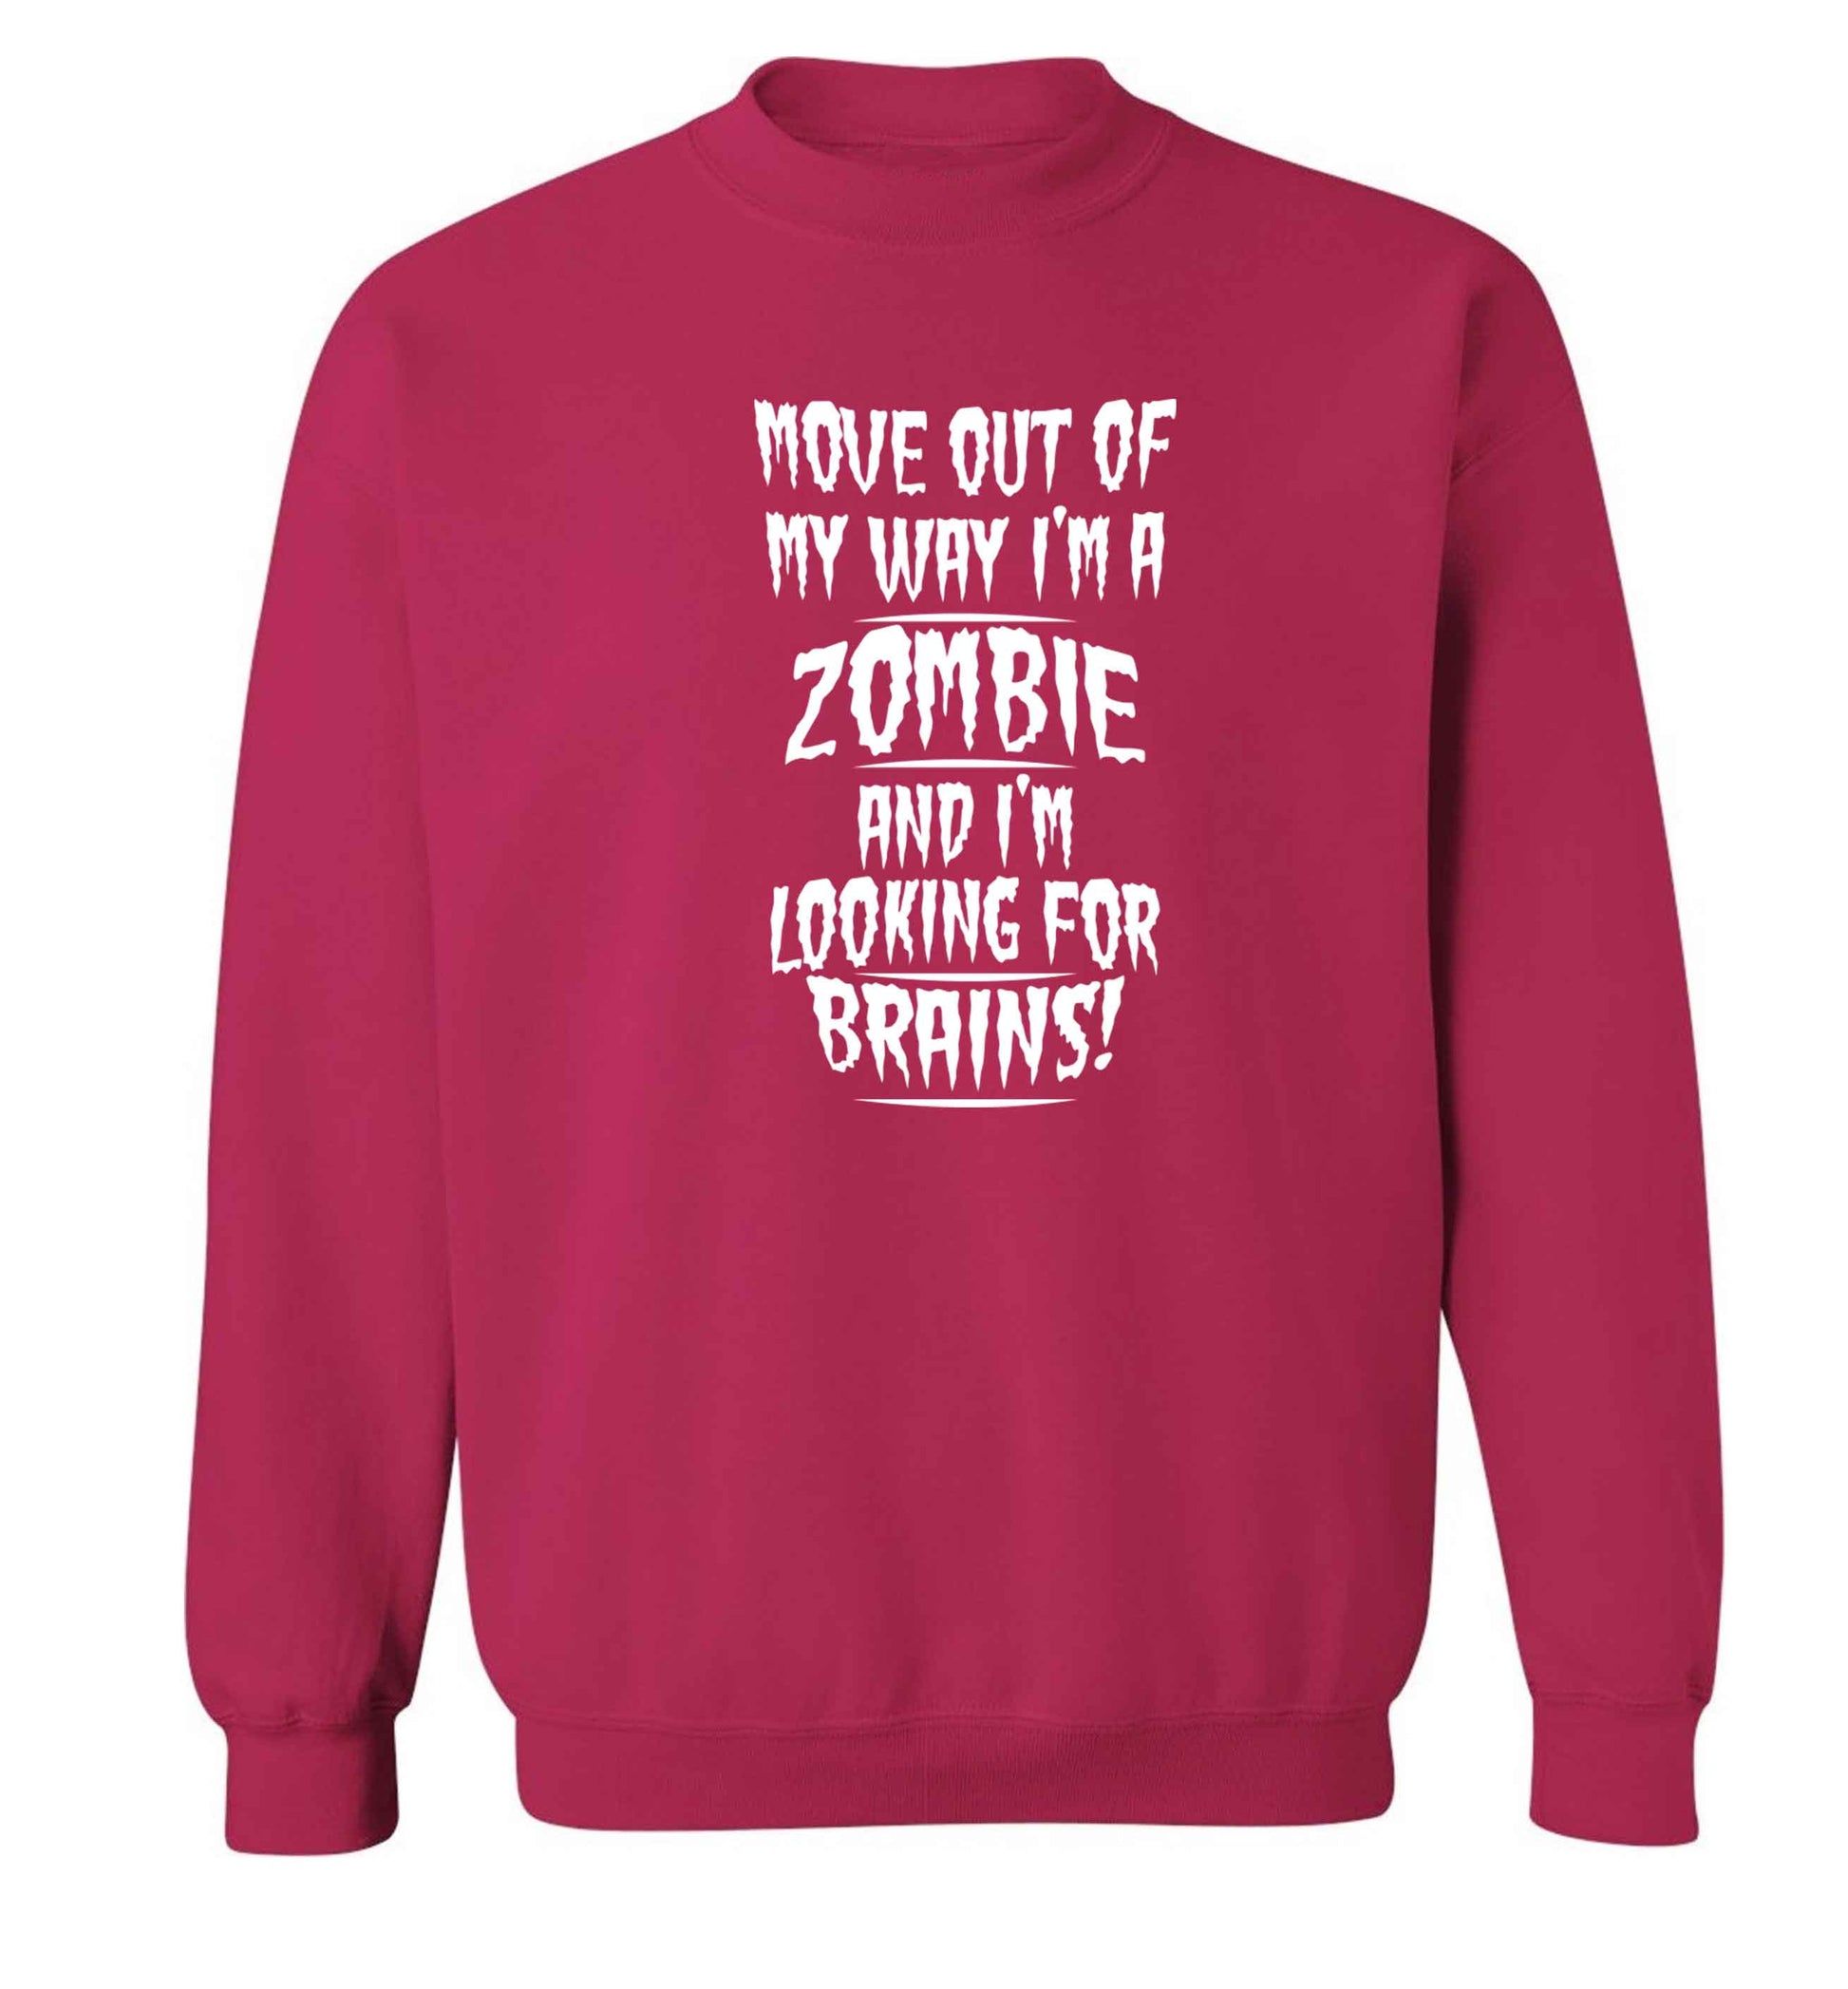 I'm a zombie and I'm looking for brains! Adult's unisex pink Sweater 2XL